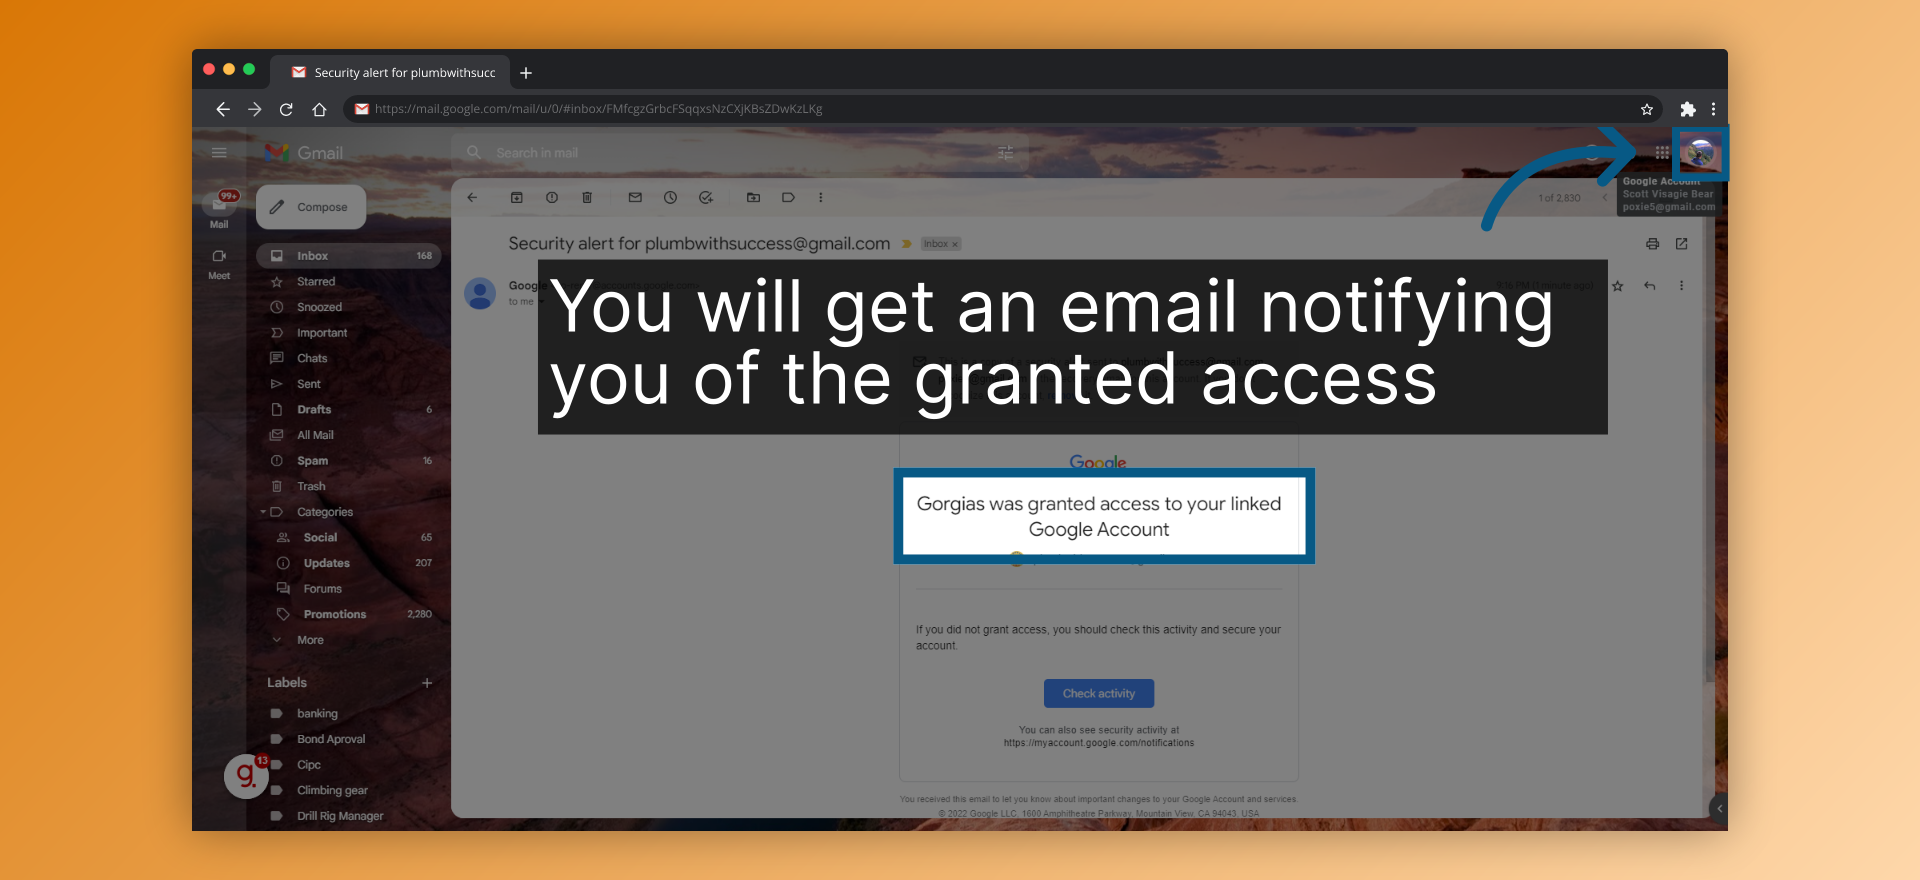 You will get an email notifying you of the granted access